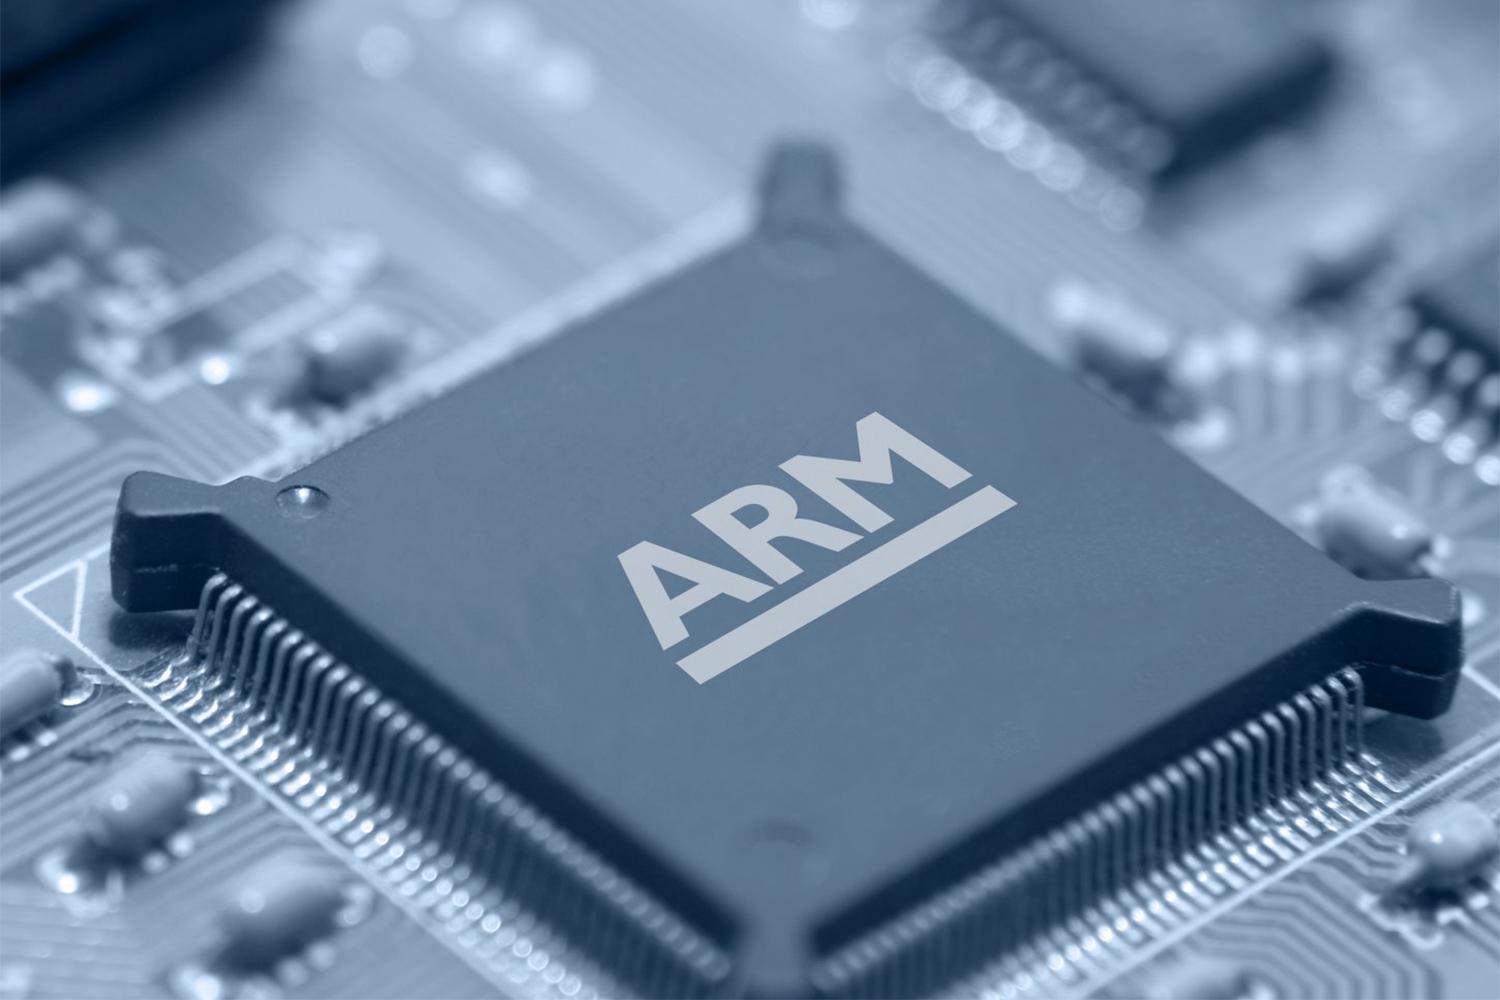 Creating ARM architecture environment inside x86/x64 linux